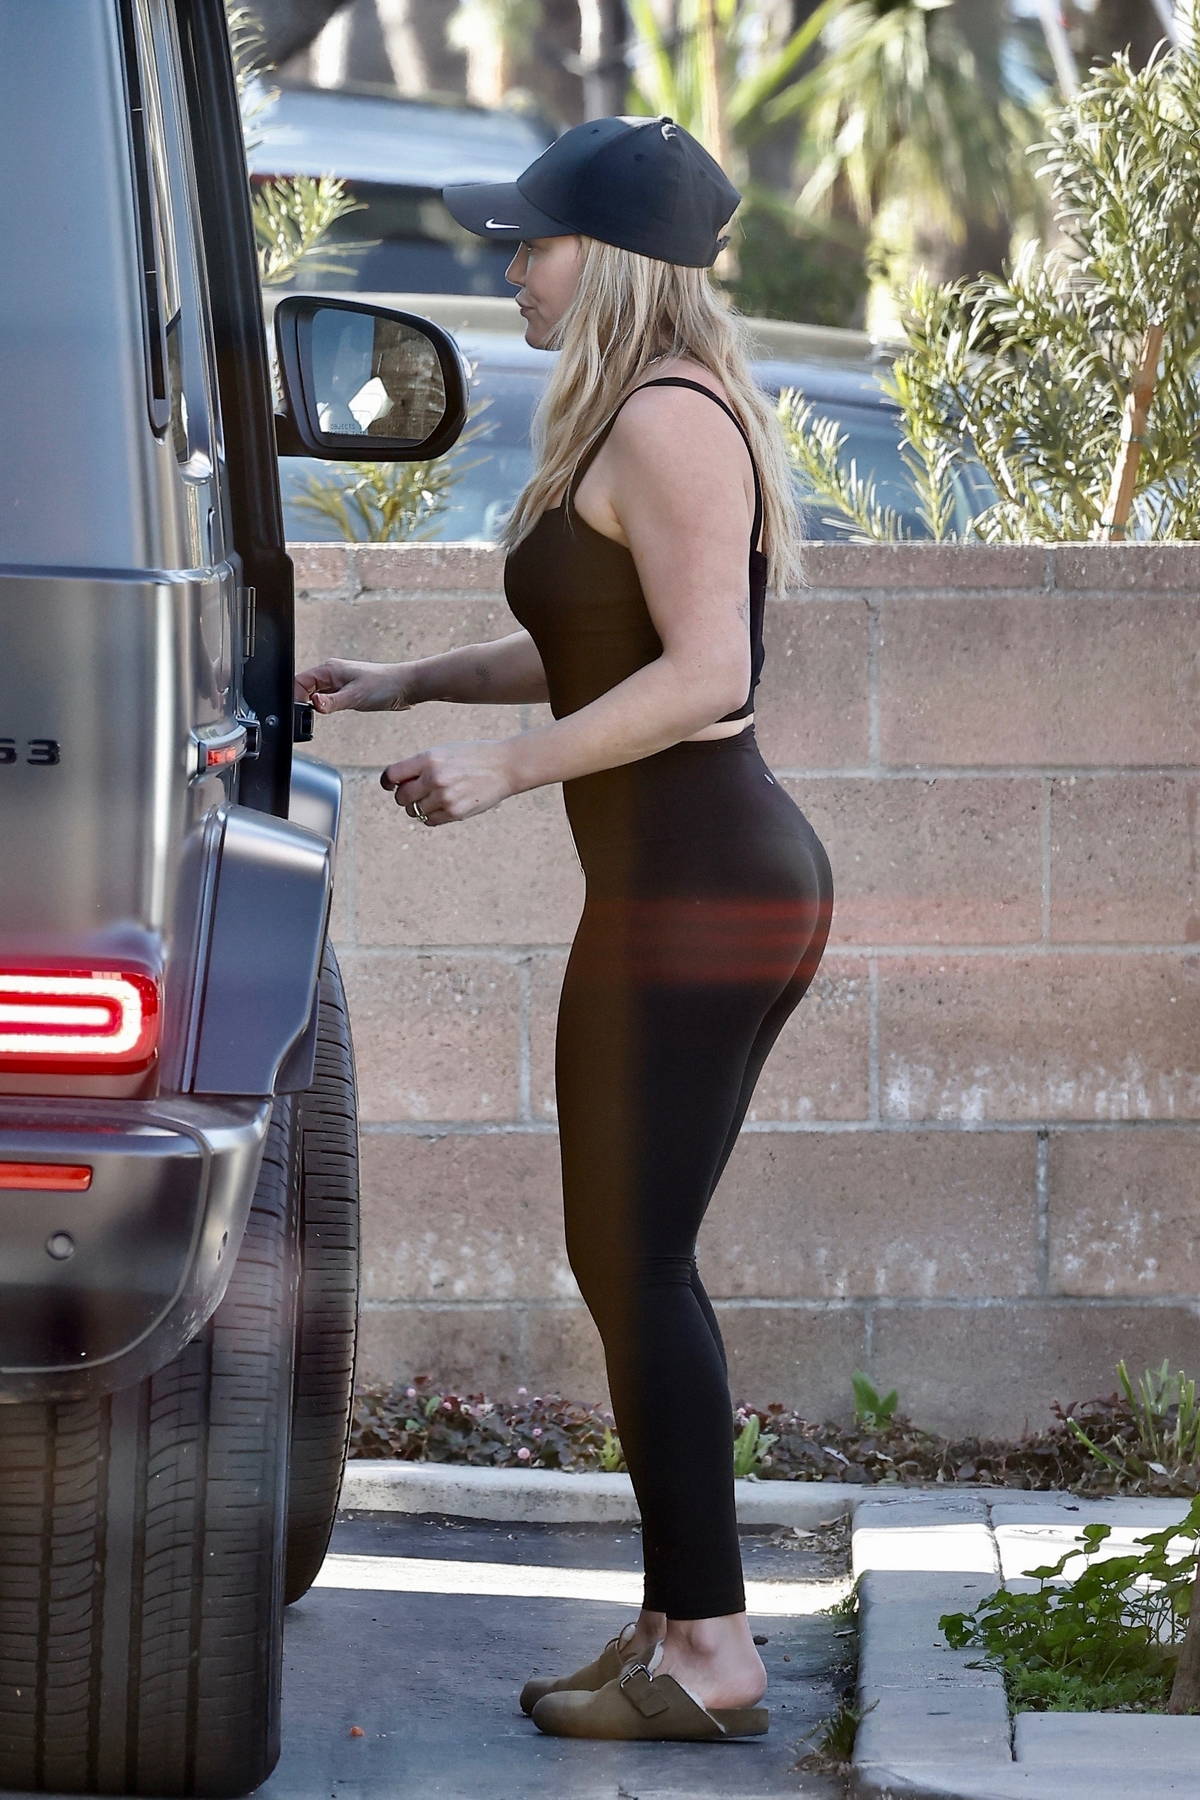 https://www.celebsfirst.com/wp-content/uploads/2023/01/hilary-duff-shows-off-her-curves-in-a-black-tank-top-and-leggings-while-out-in-studio-city-california-210123_1.jpg